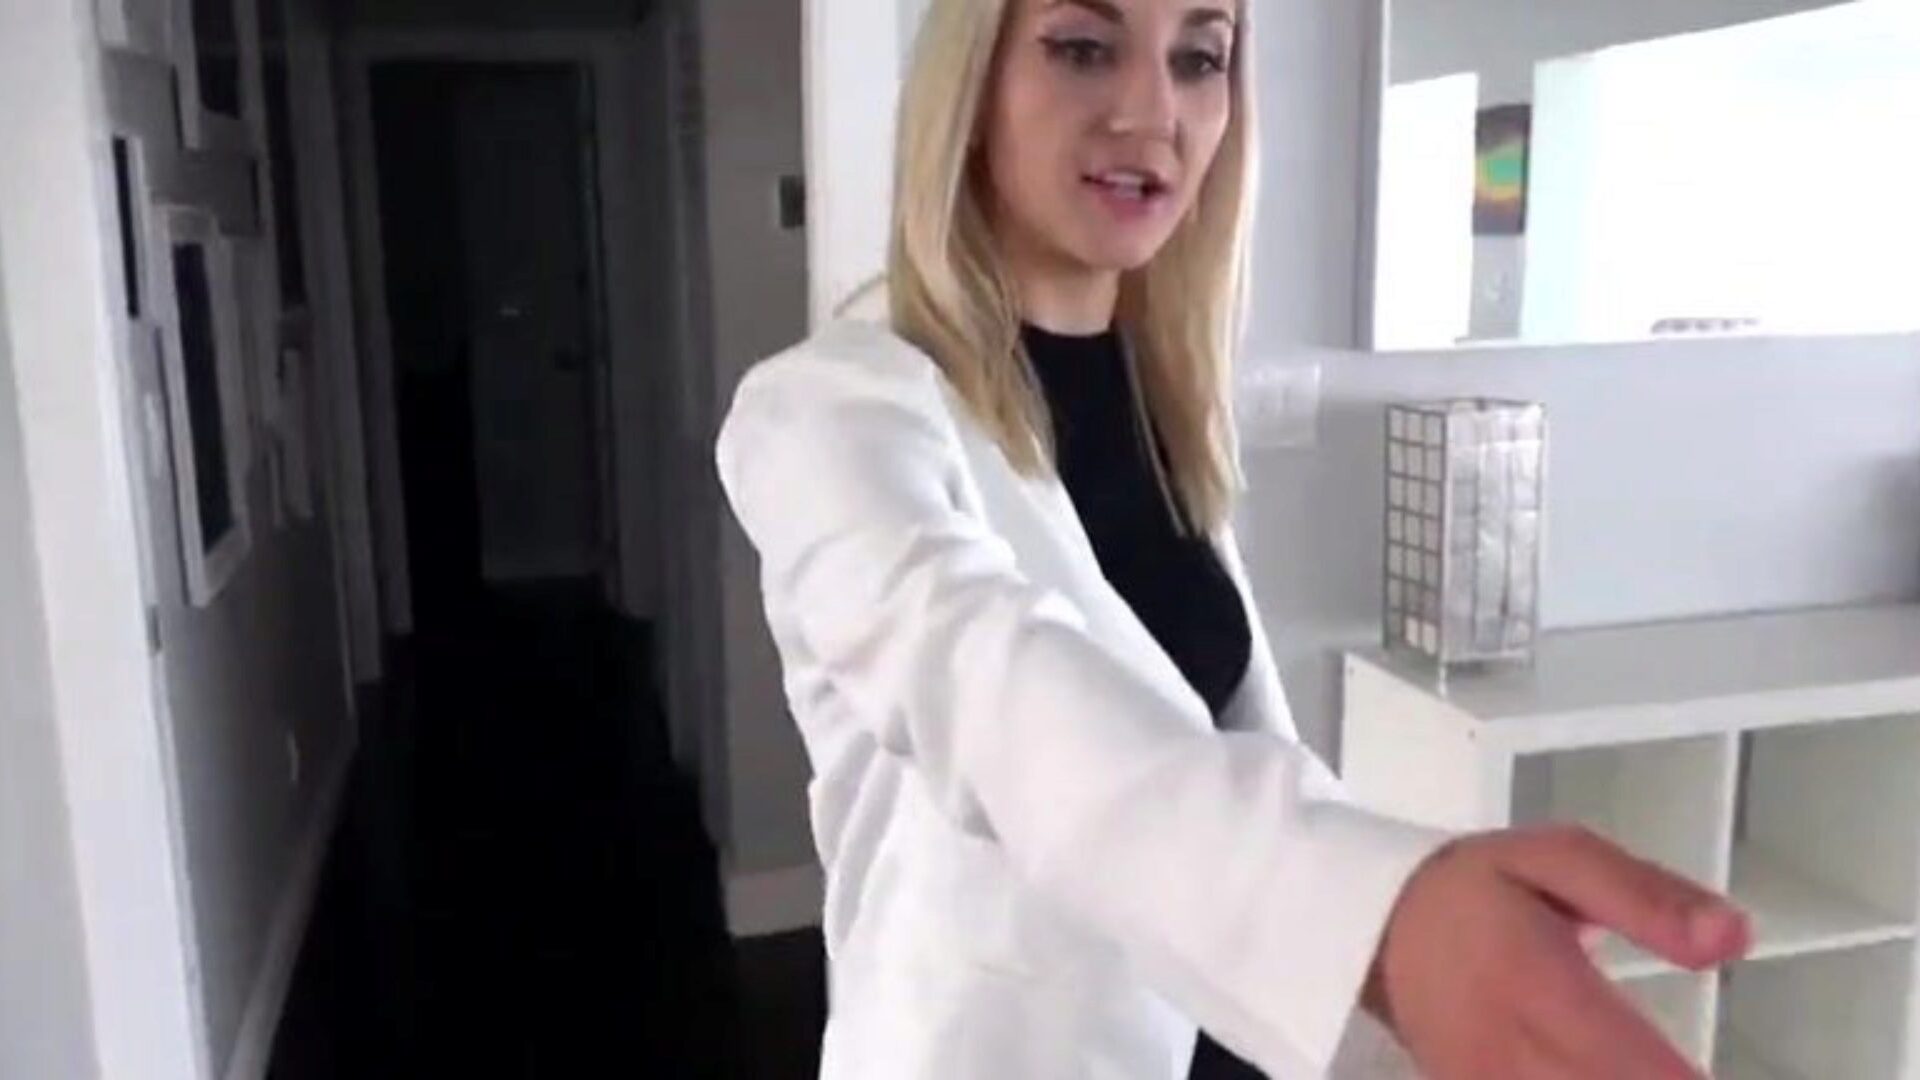 PropertySex - Hot blond real estate agent combines biz with fun